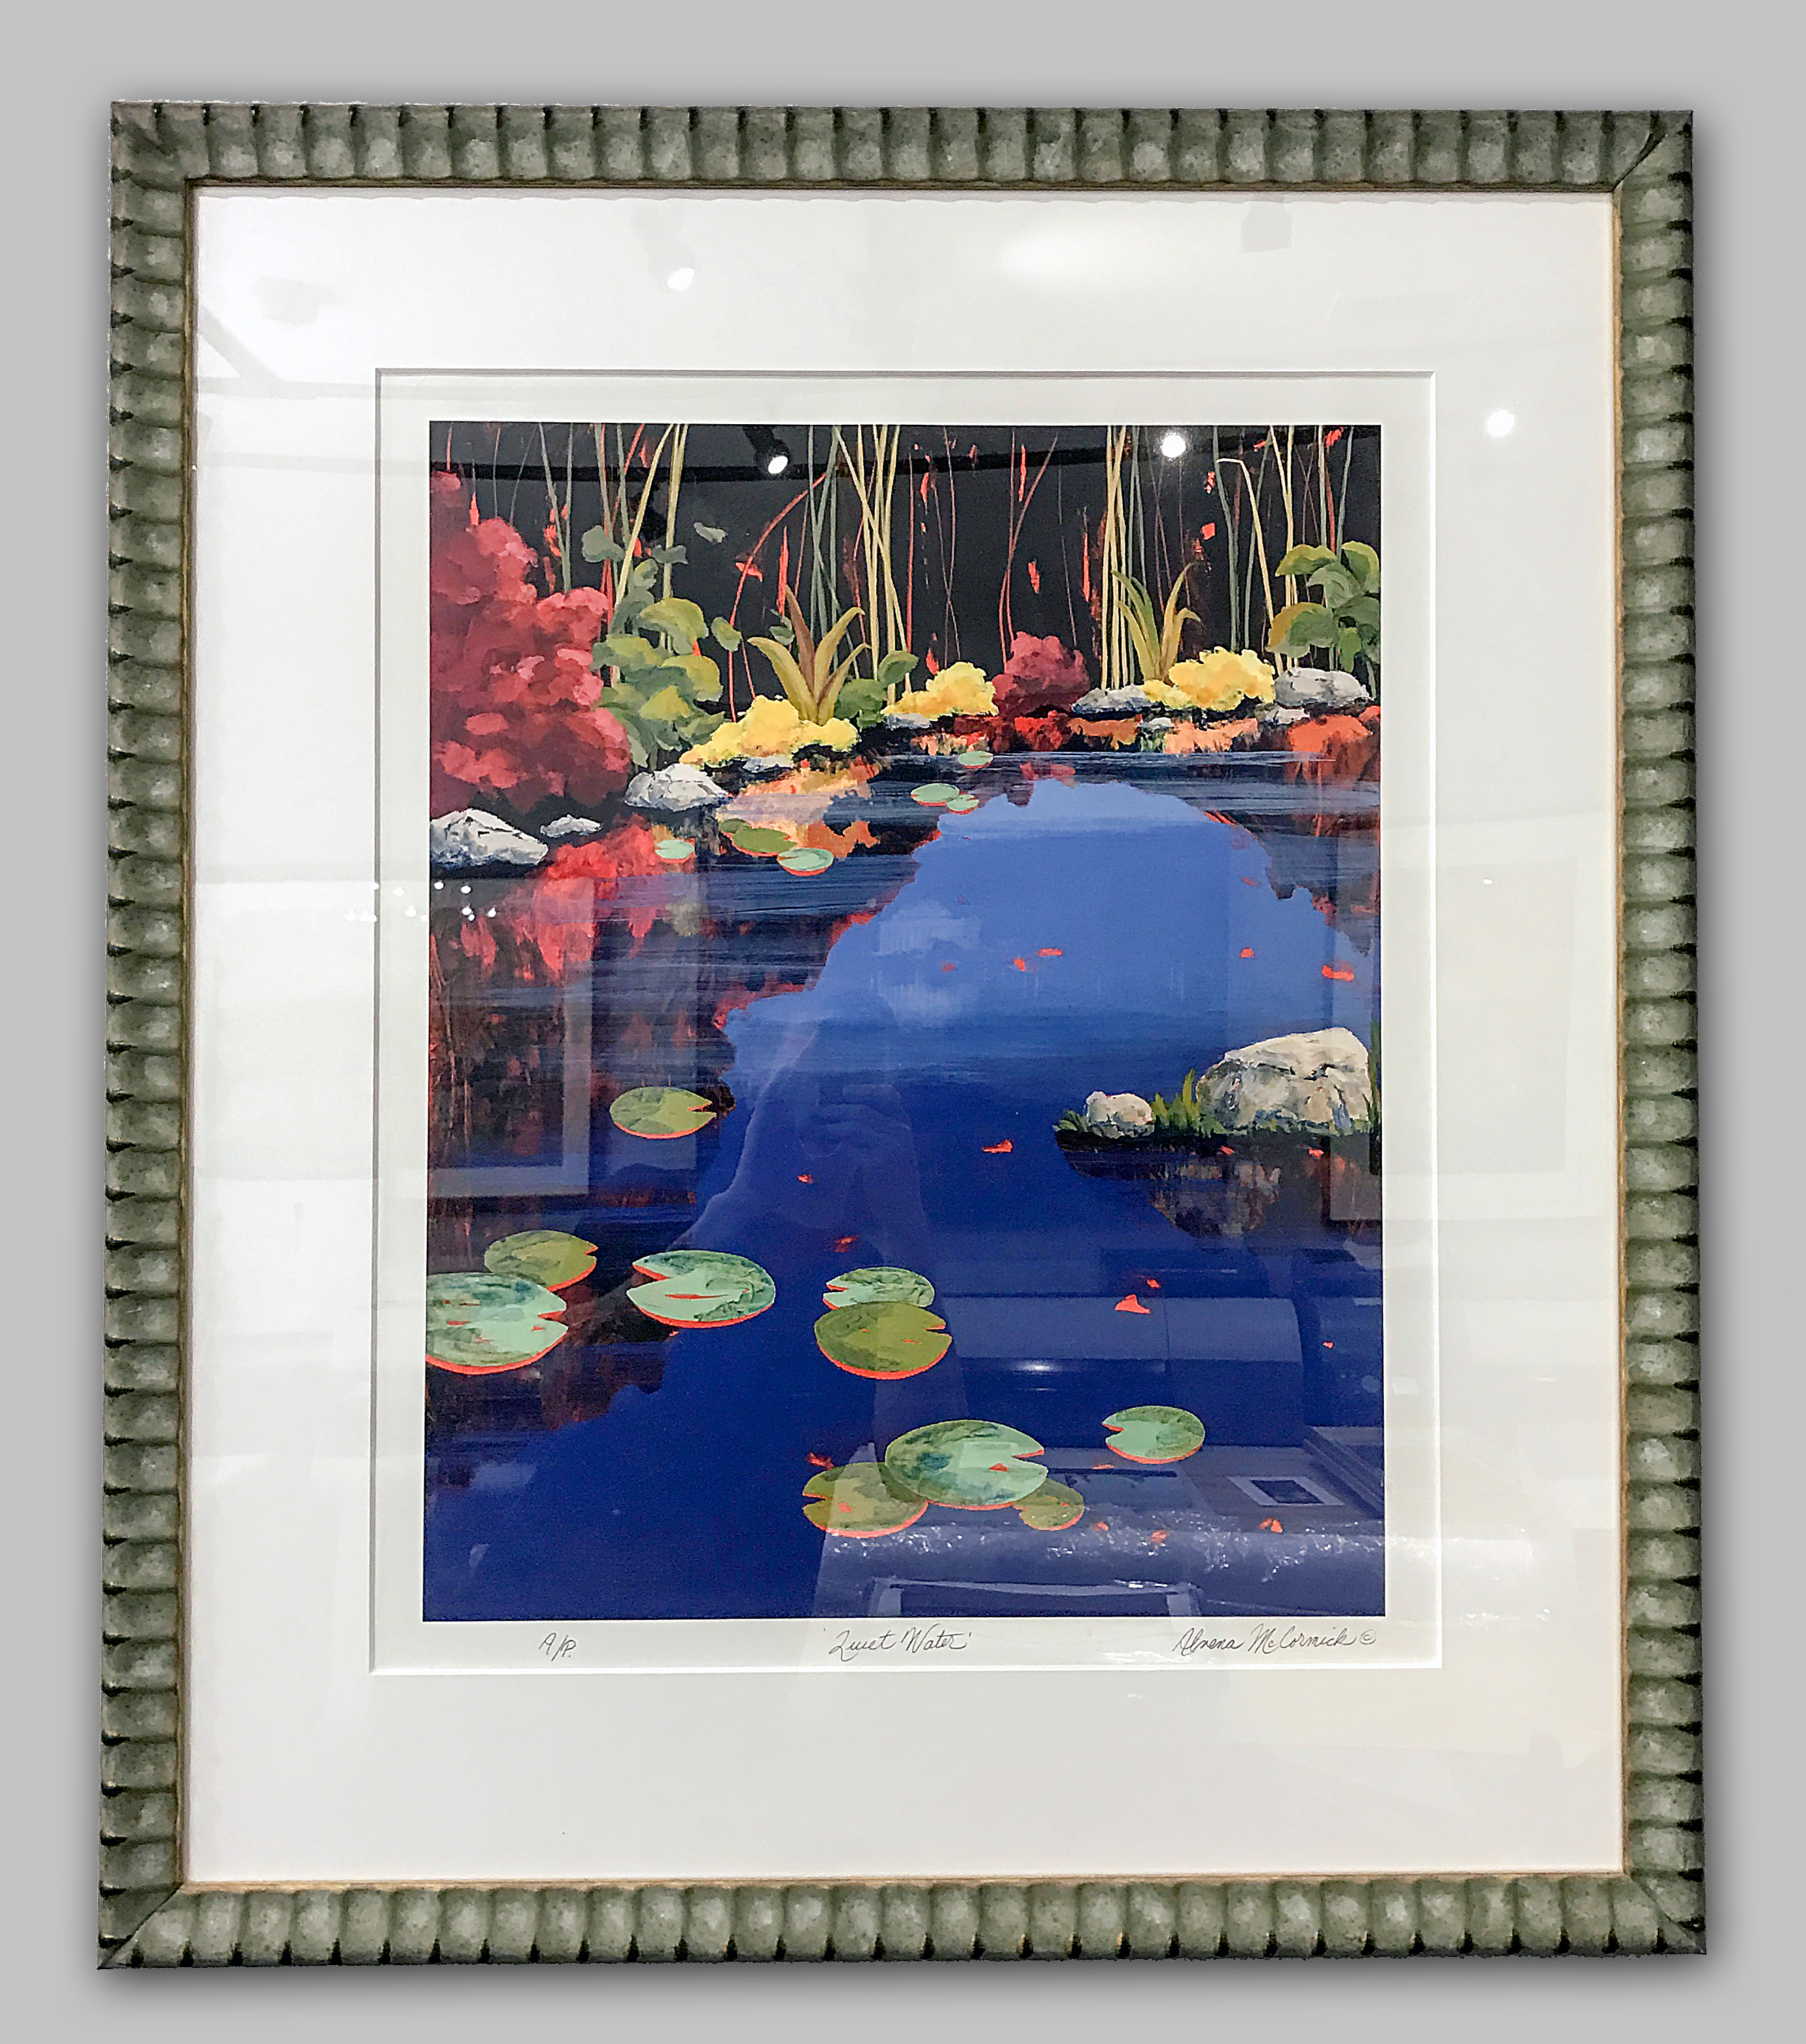 Example of how to sign art prints, artwork of a pond by Northern Virginia artist Alvena McCormick.